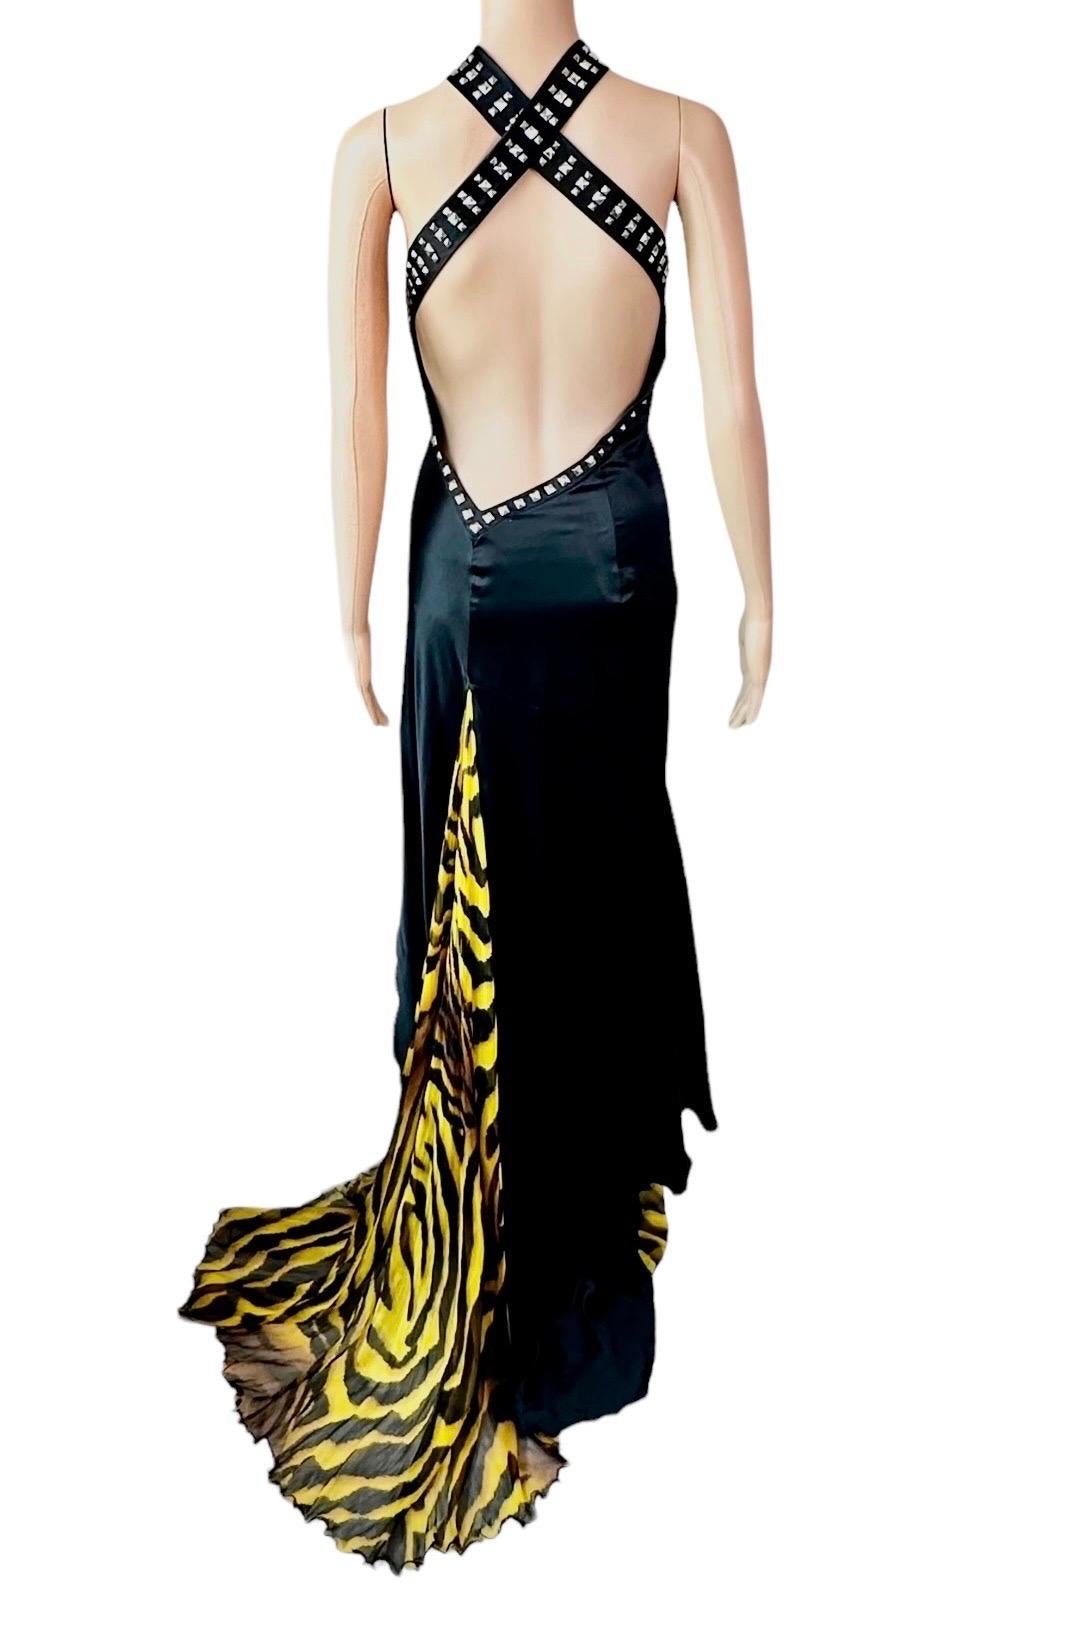 Versace F/W 2004 Runway Studded Plunging Keyhole Neckline Evening Dress Gown For Sale 2